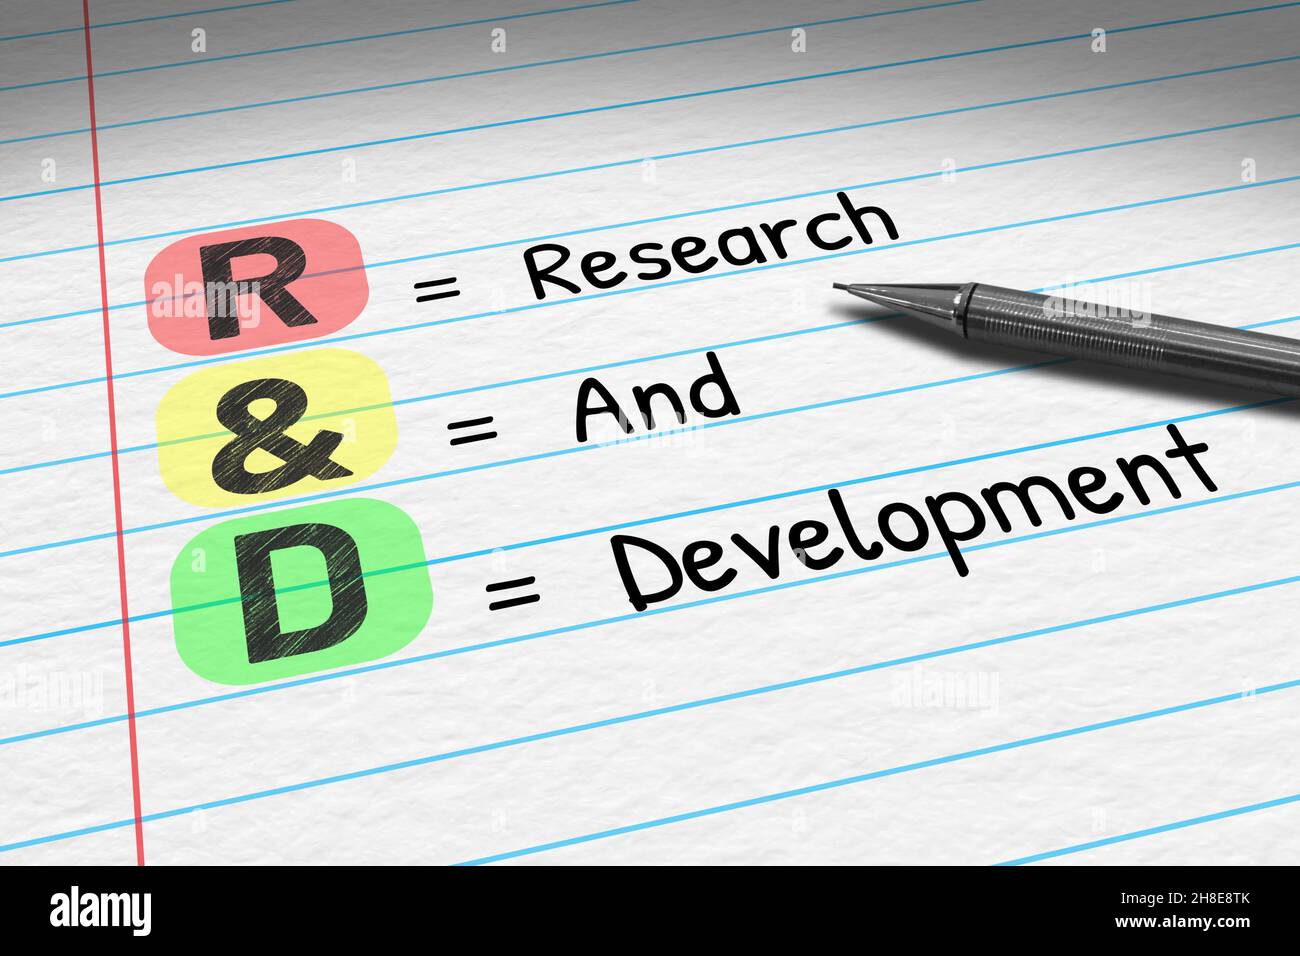 R&D - Research and Development. Business acronym on note pad Stock Photo -  Alamy